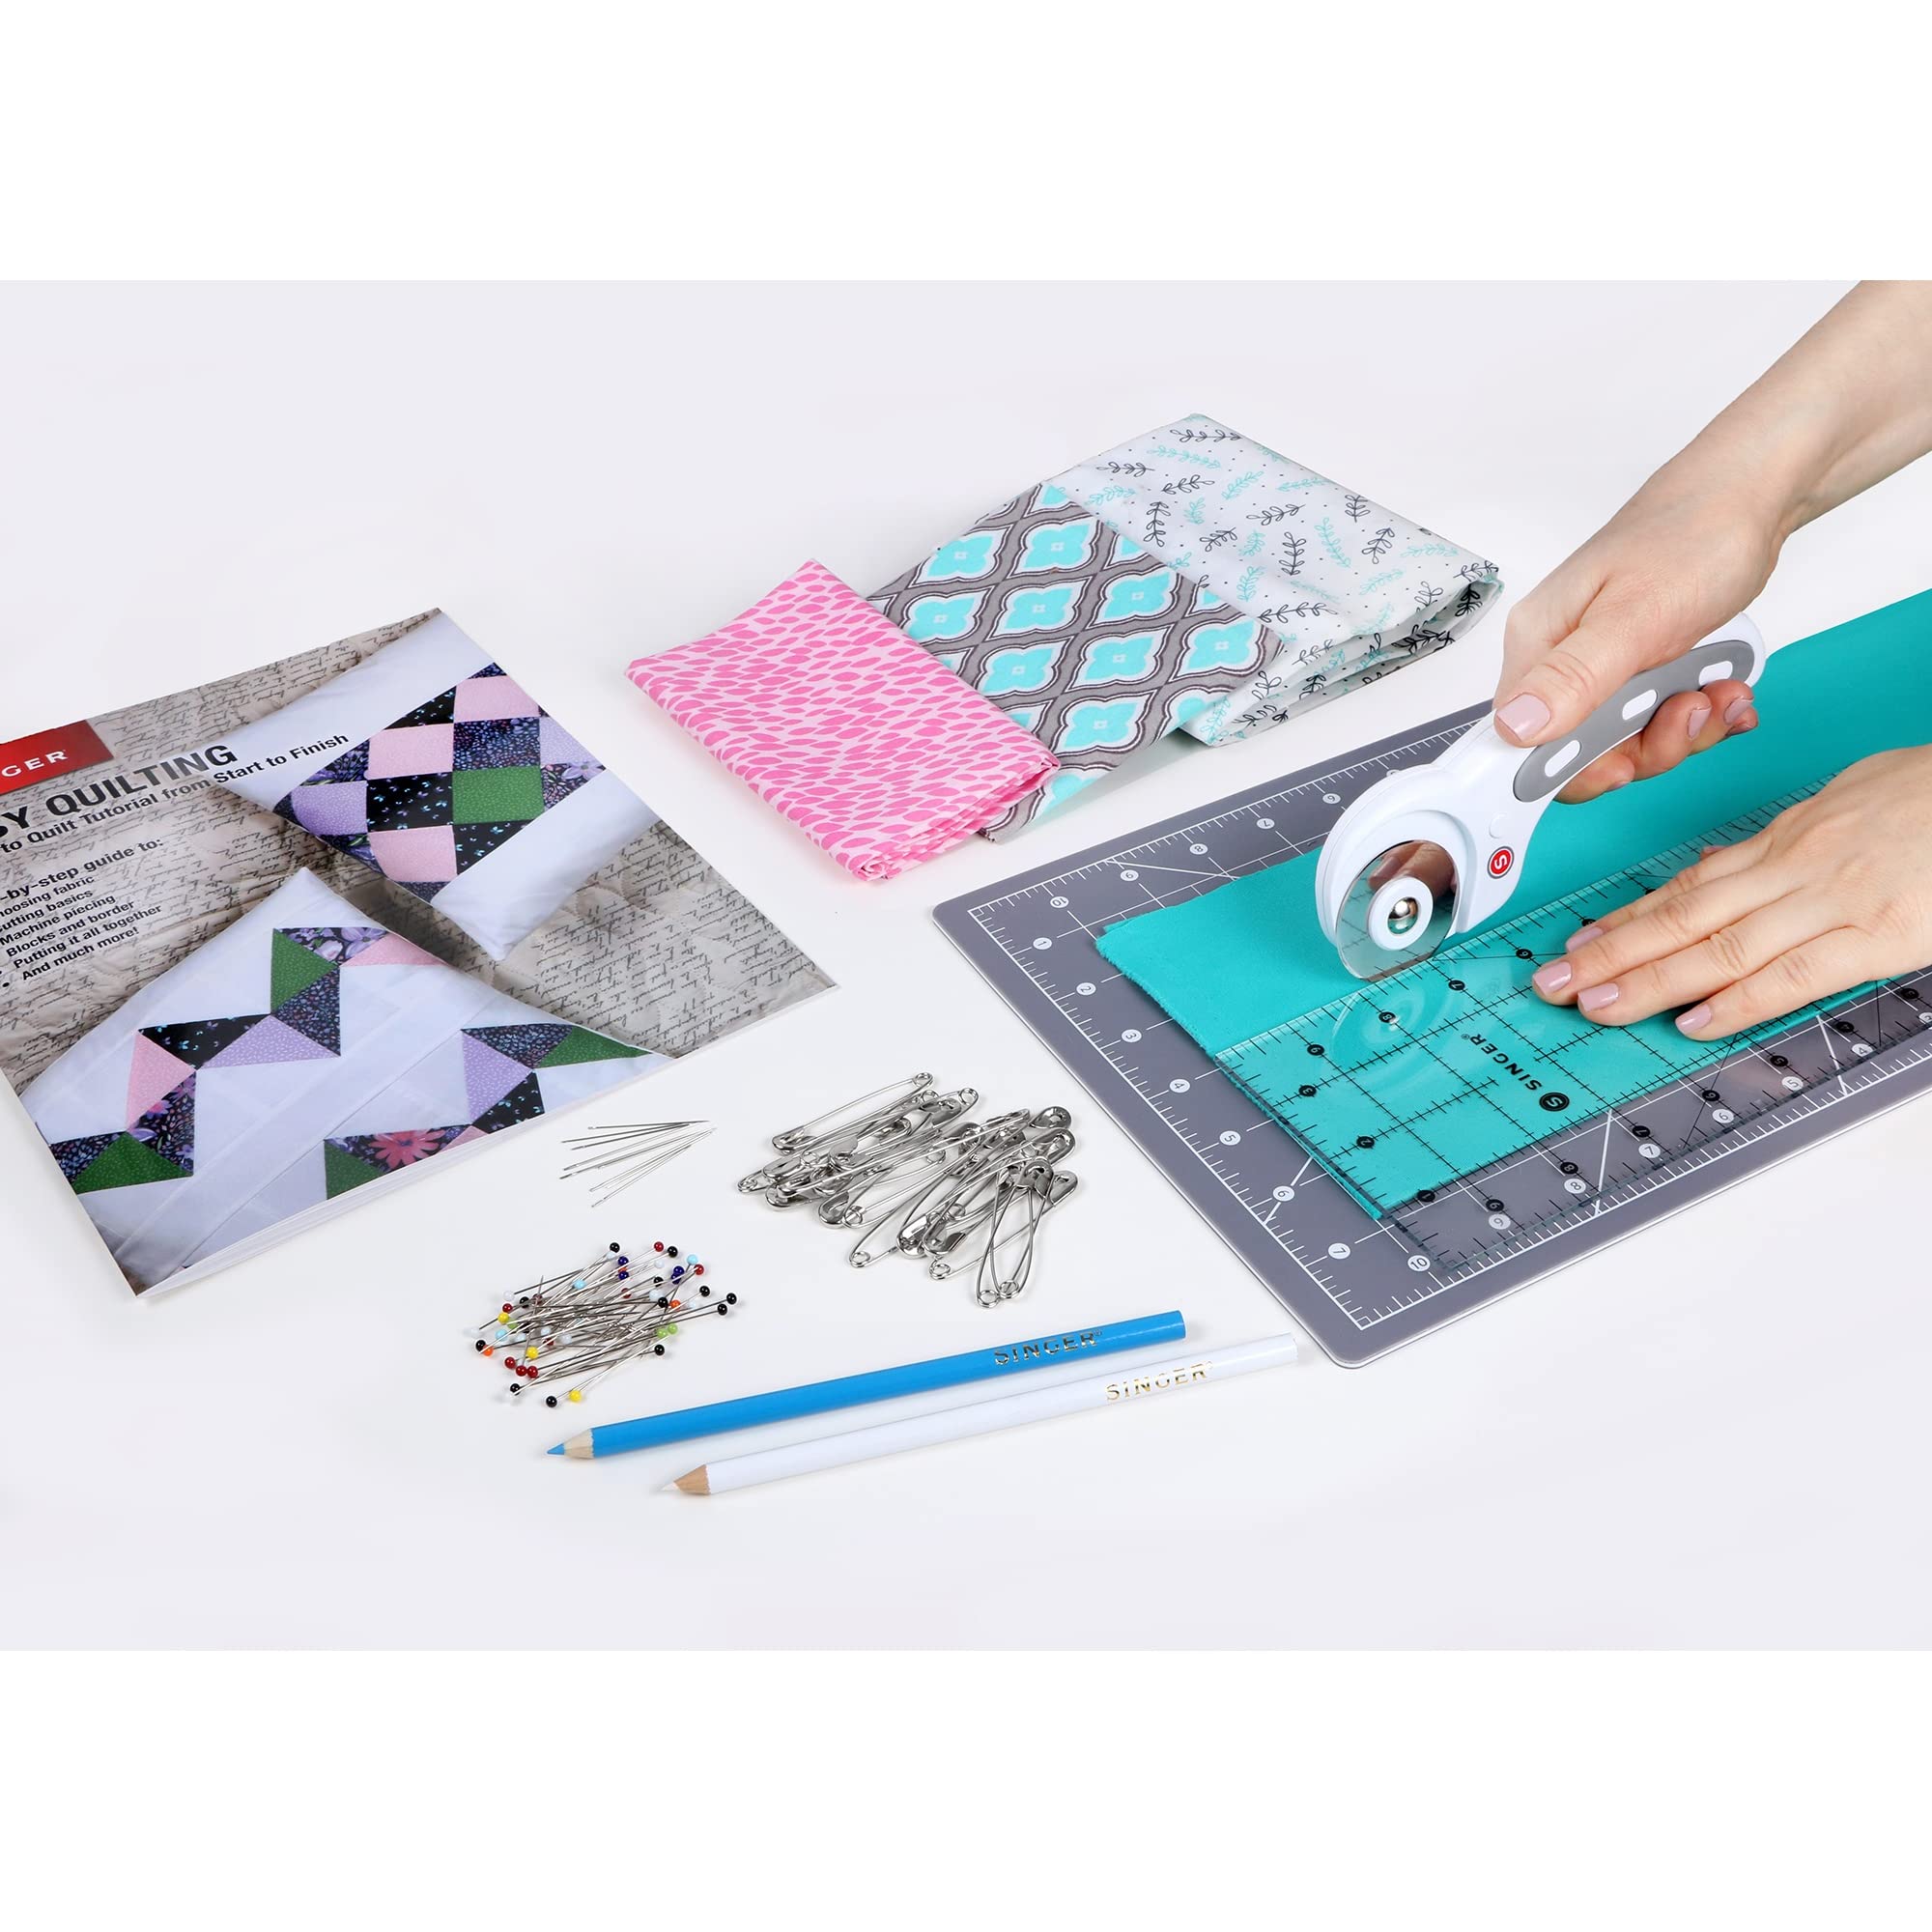 SINGER Learn to Quilt Sewing Kit for Beginners and Adults with Rotary Cutter, Cutting Mat, Acrylic Ruler, and More